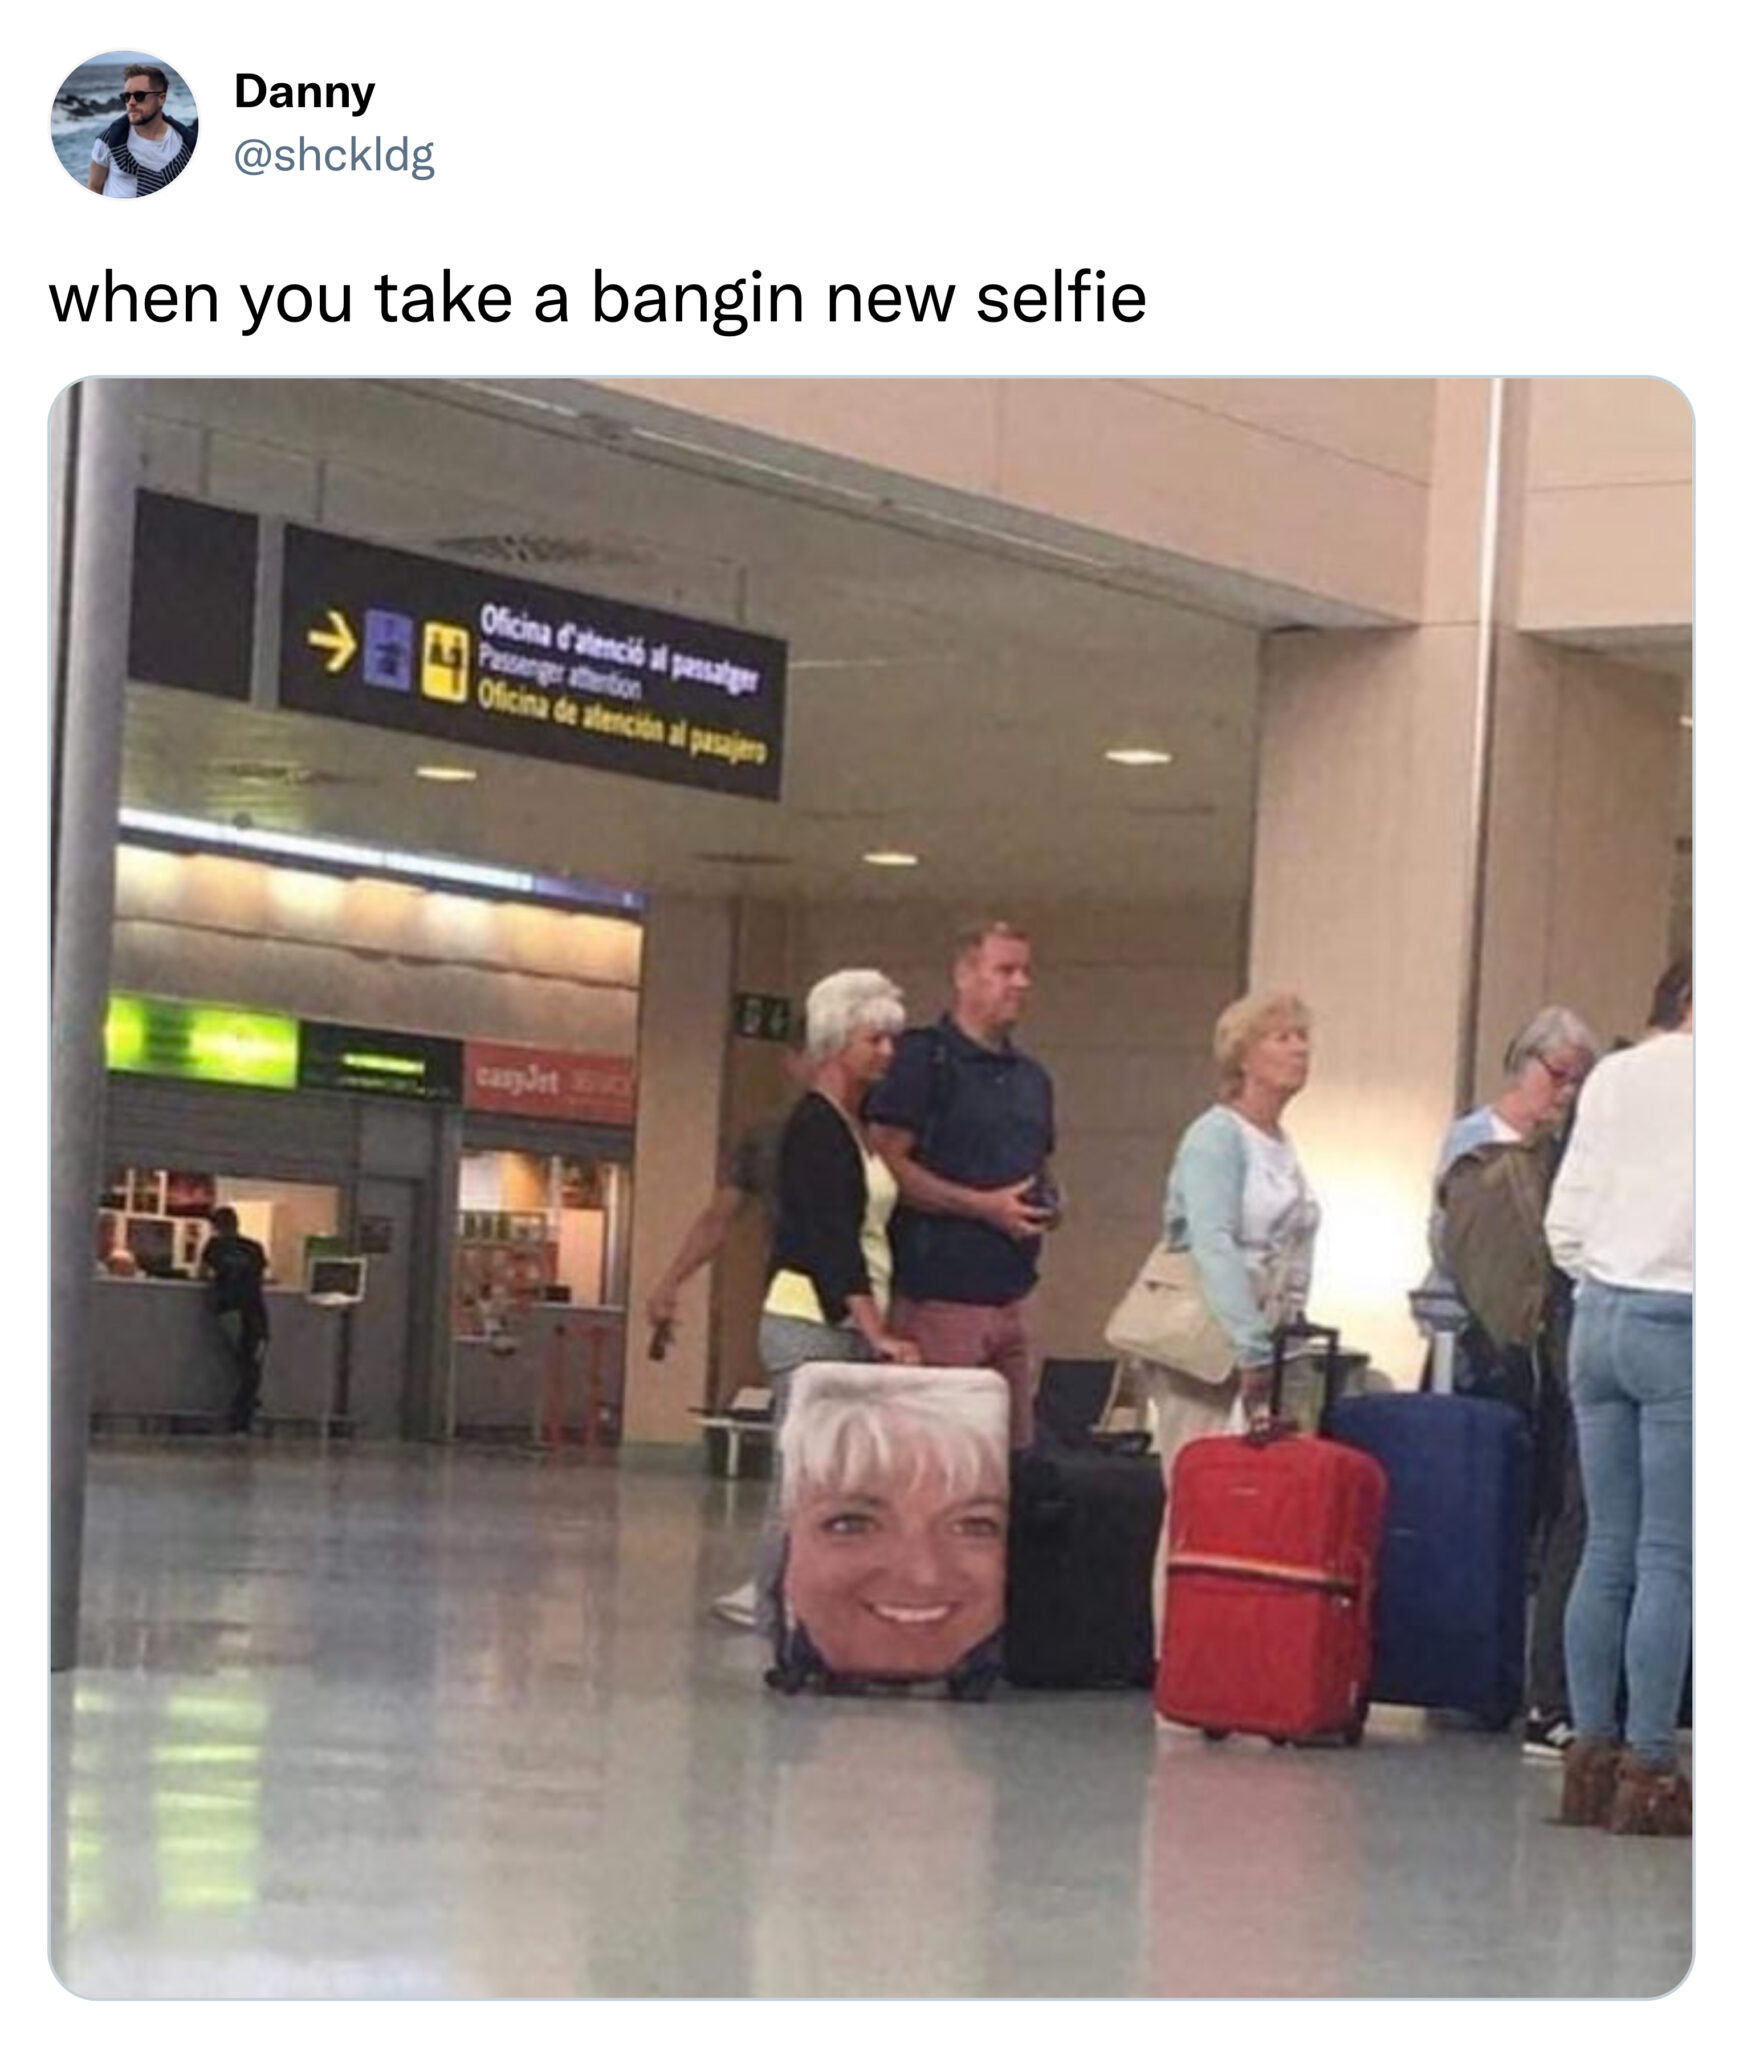 savage tweets - woman with her face on suitcase - Danny when you take a bangin new selfie Te Oficina d'atenci al passatger Passenger attention easyJet Eucy